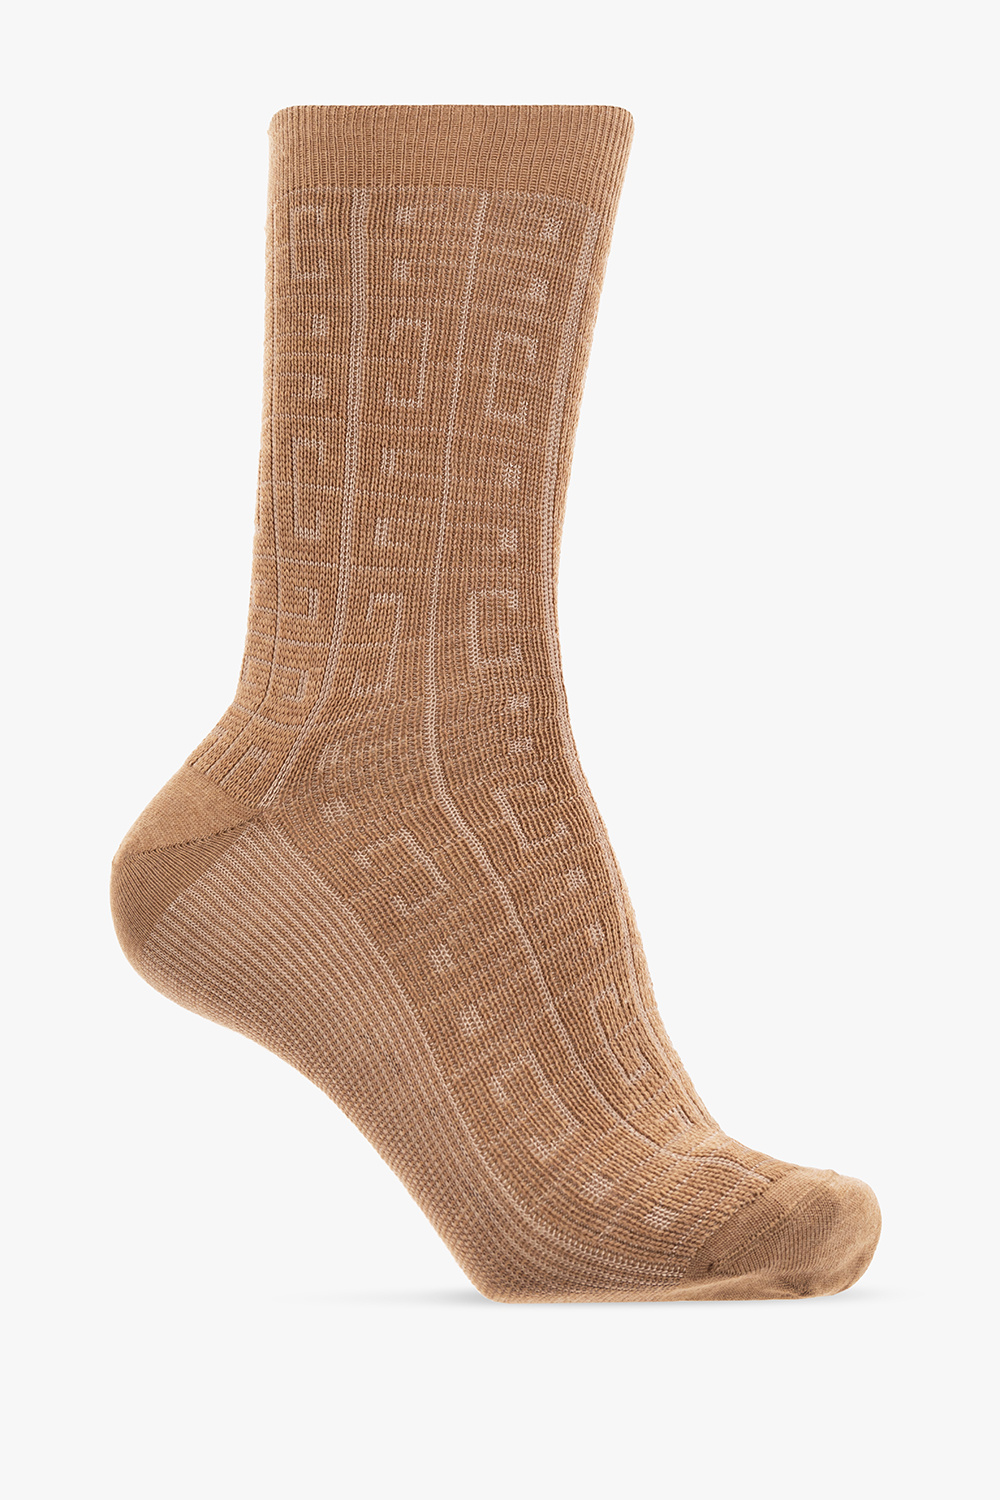 givenchy Tables Socks with monogram